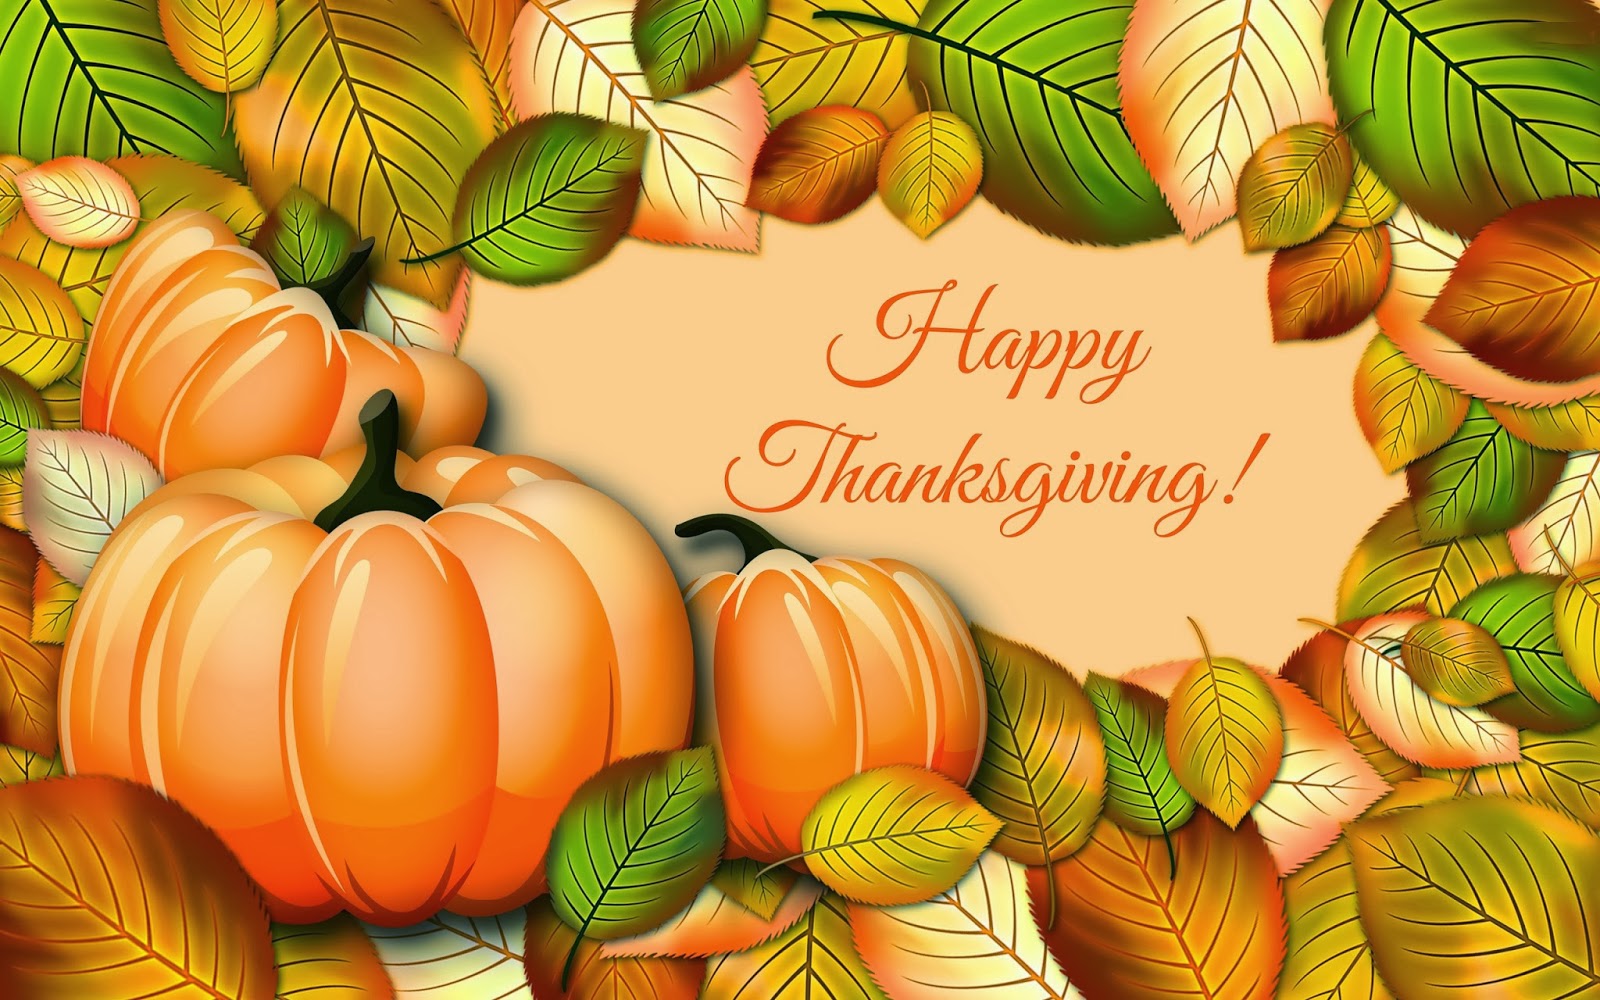 50+] Free Thanksgiving Wallpapers and